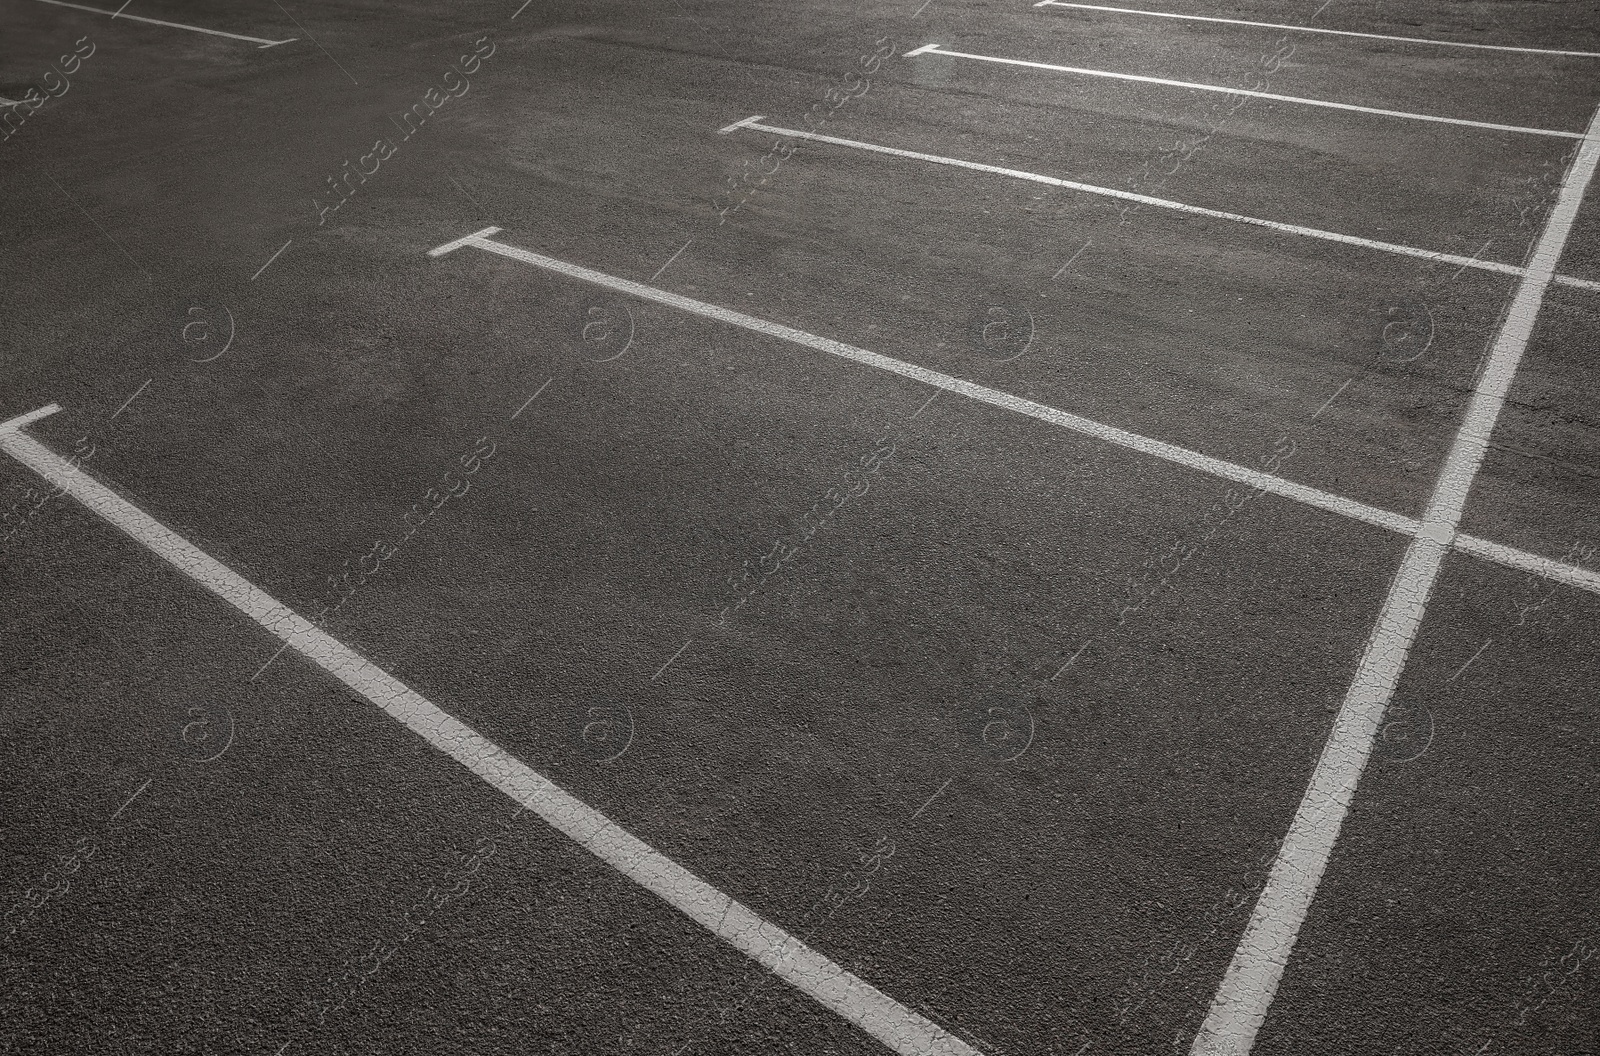 Photo of Outdoor car parking lot with white marking lines 